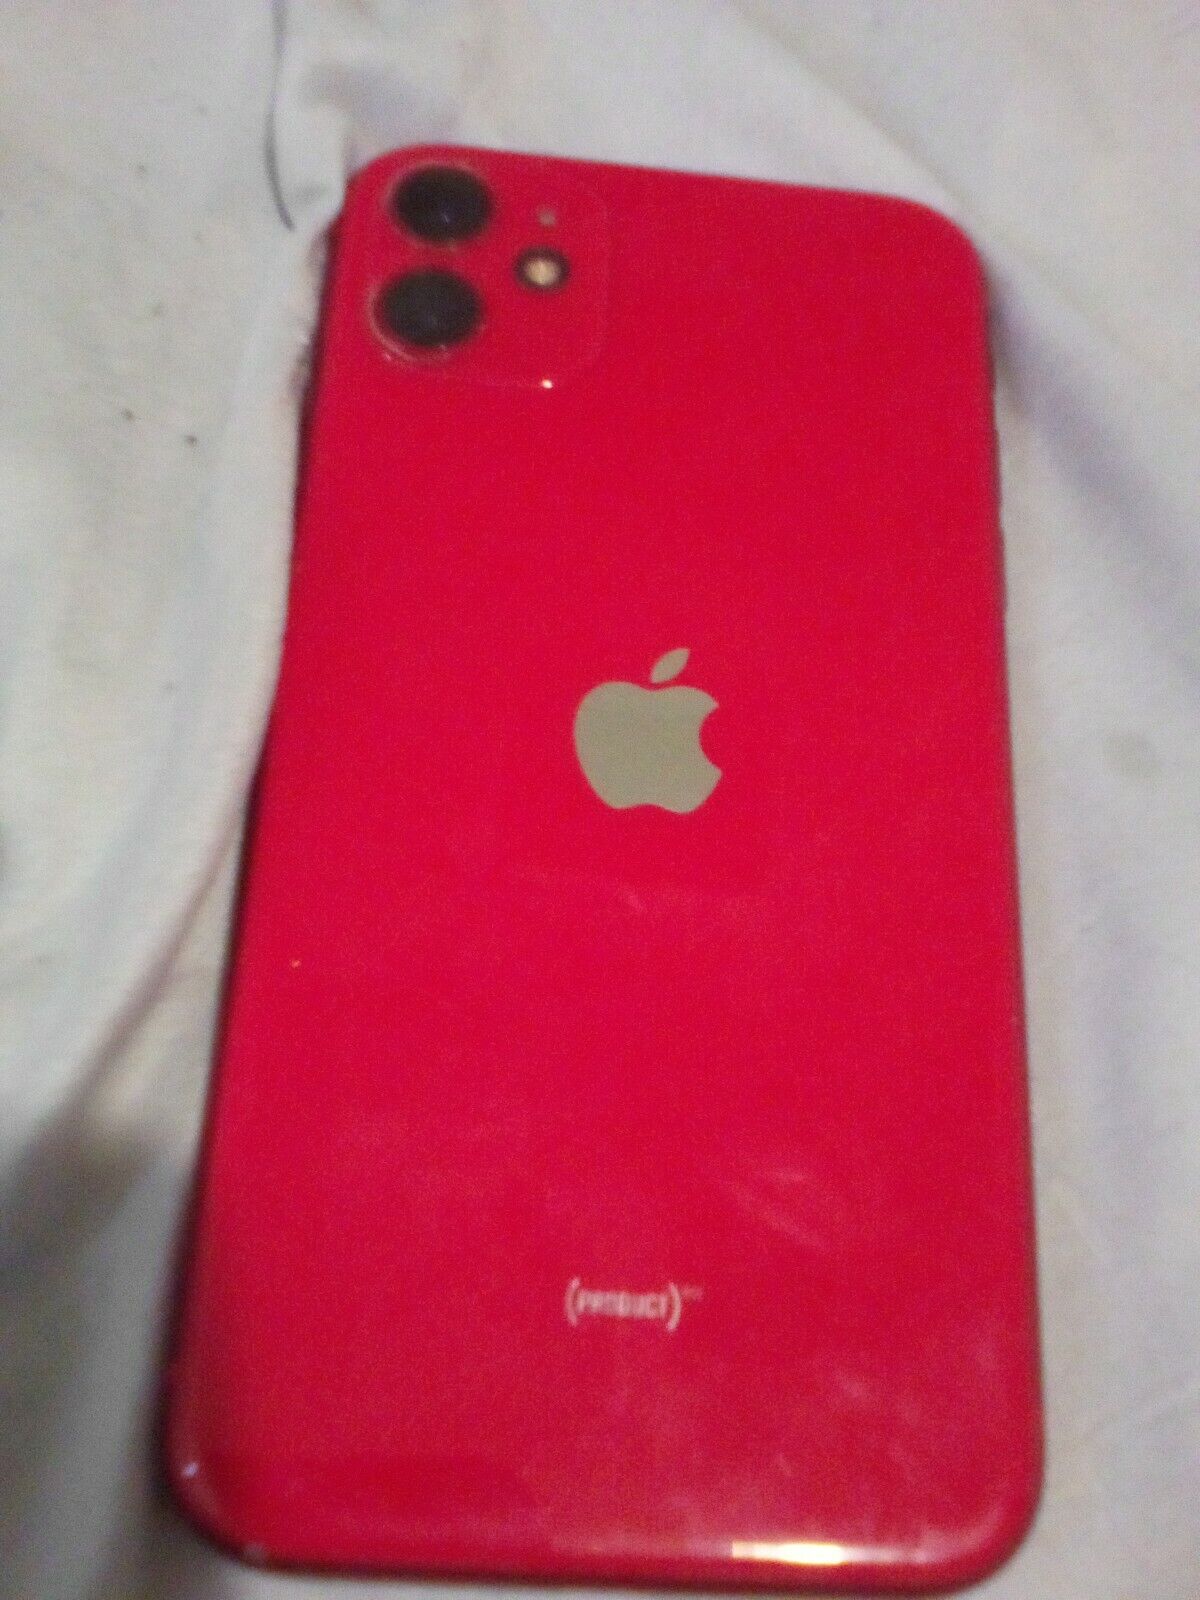 iphone 12 mini colors red